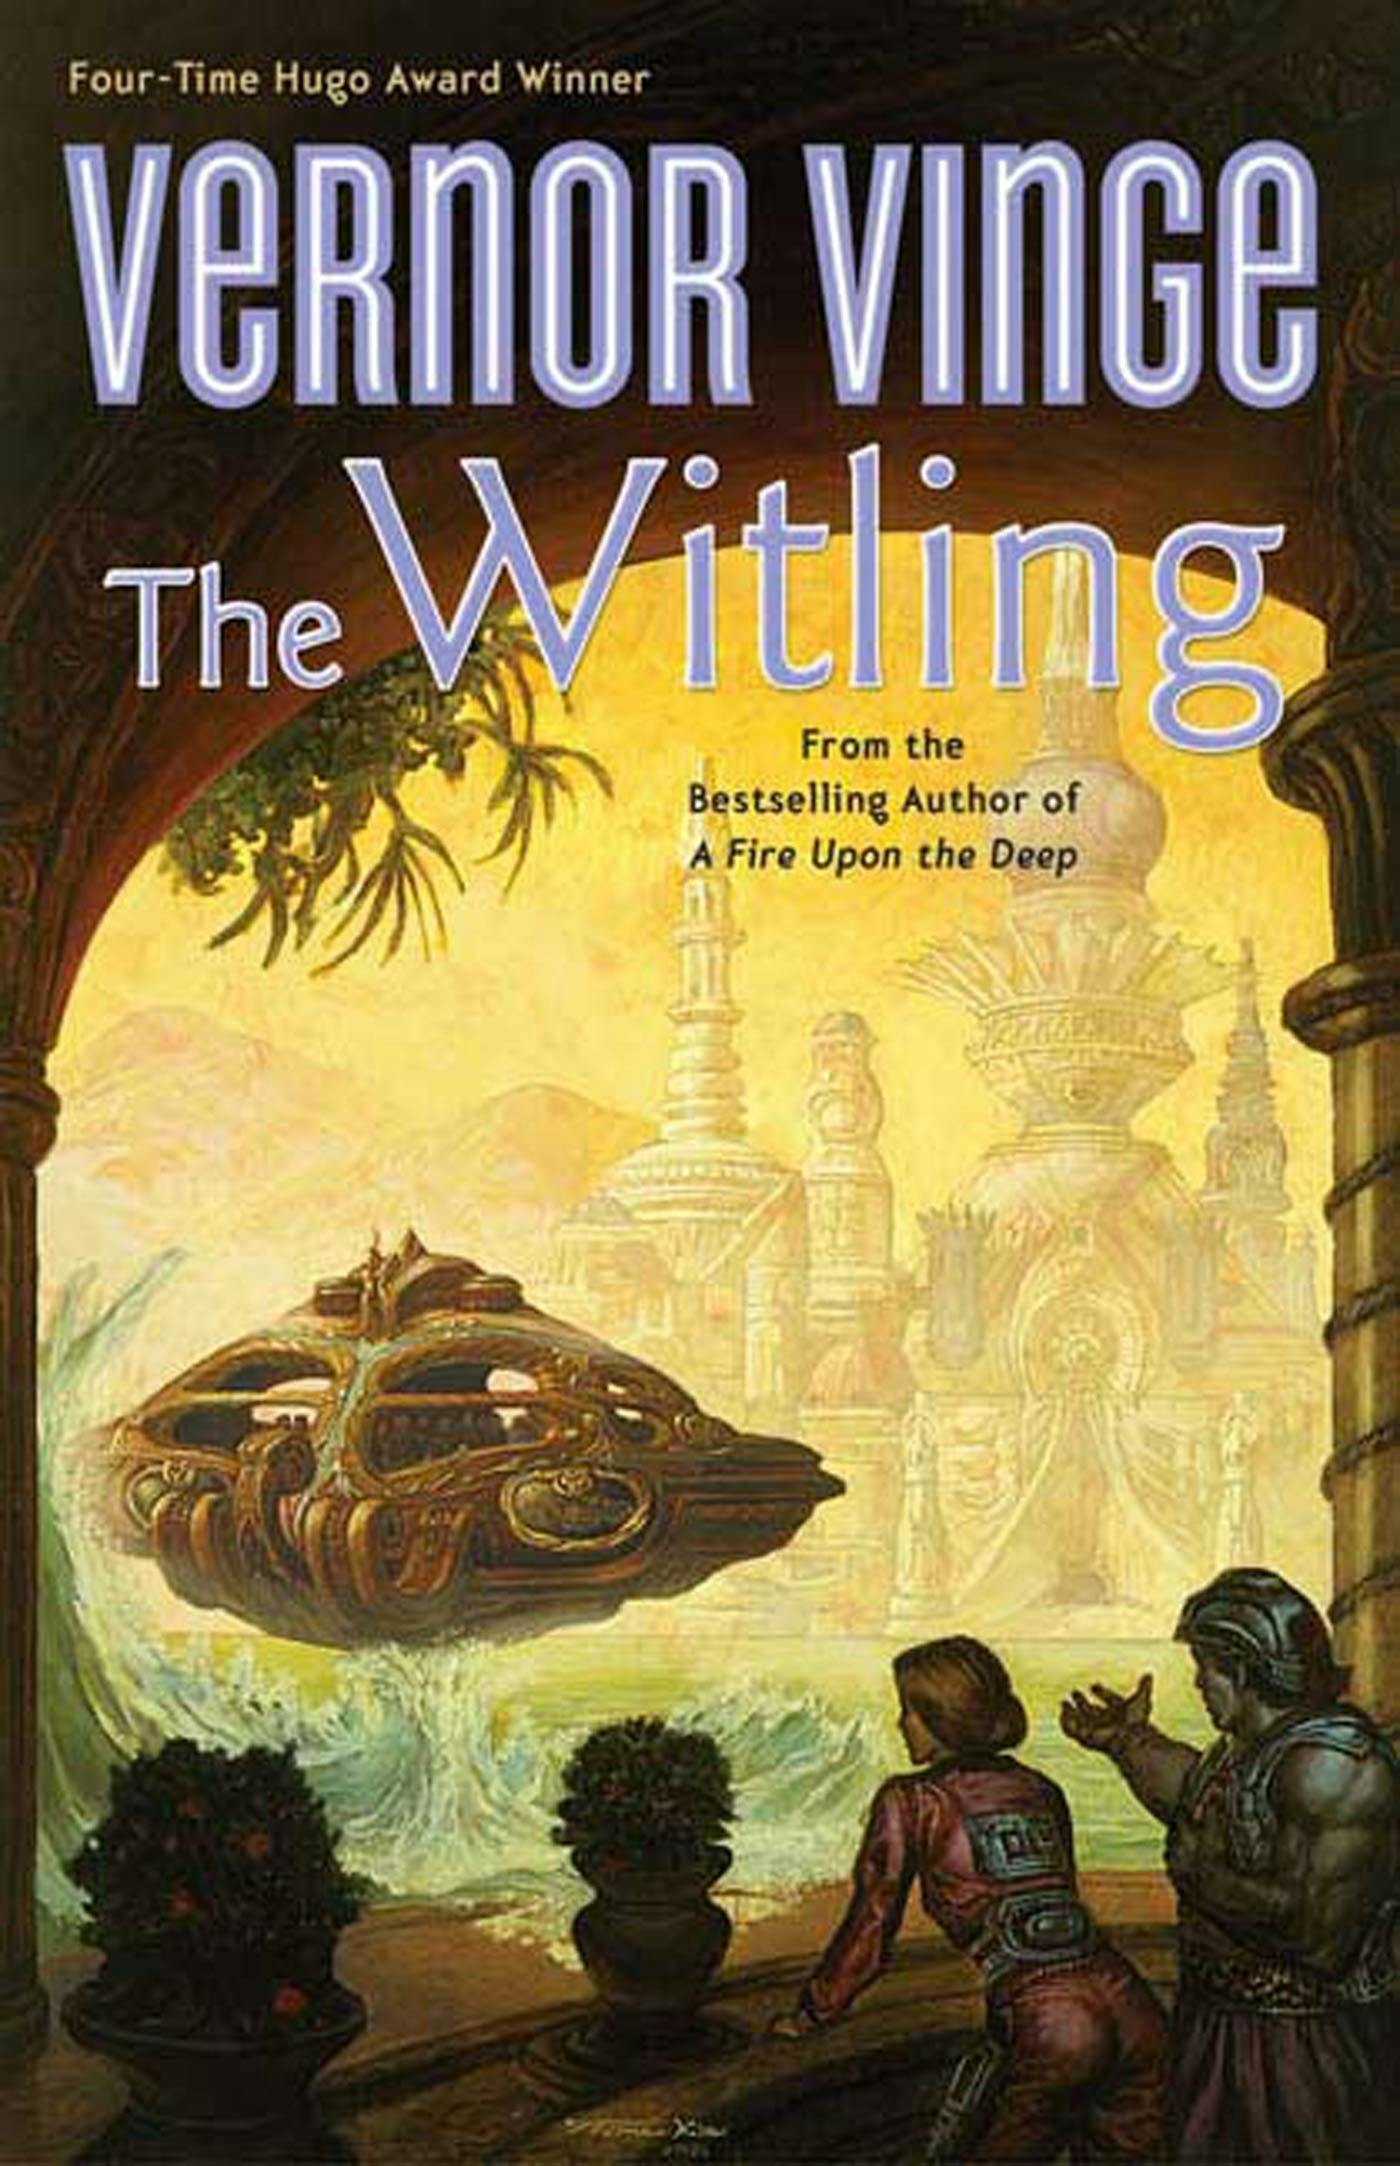 Publication: The Collected Stories of Vernor Vinge